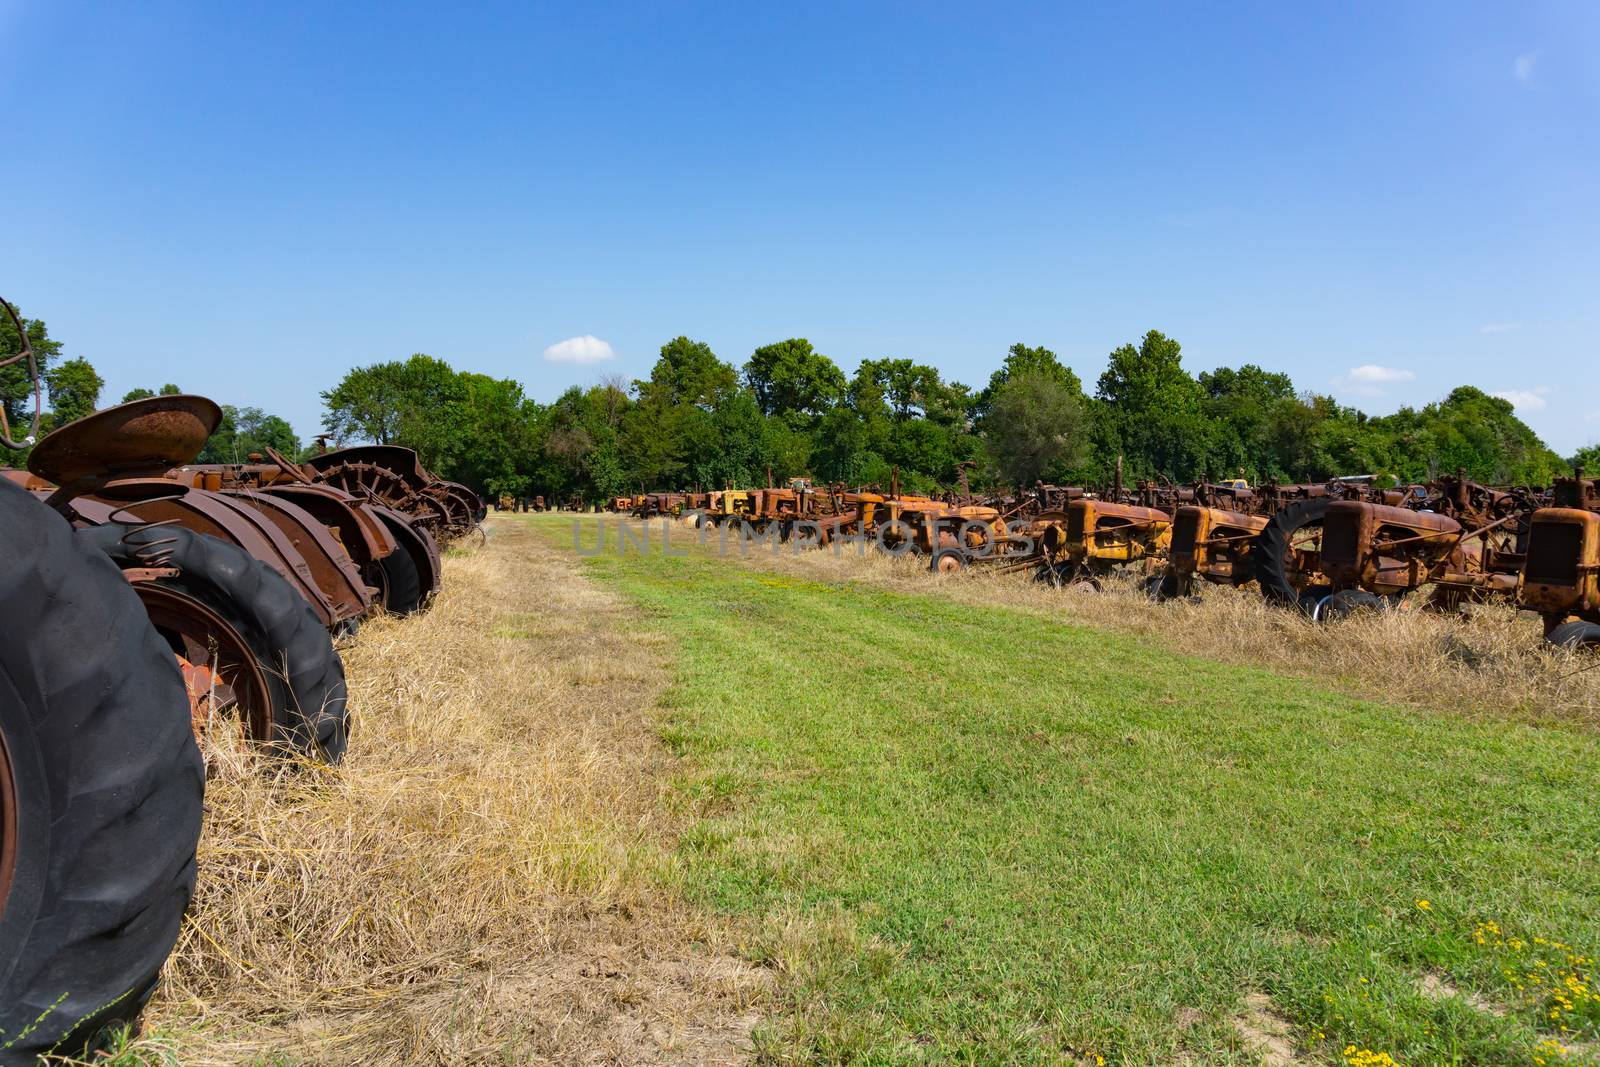 Old equipment and machinery and dead tractors lined up in field.